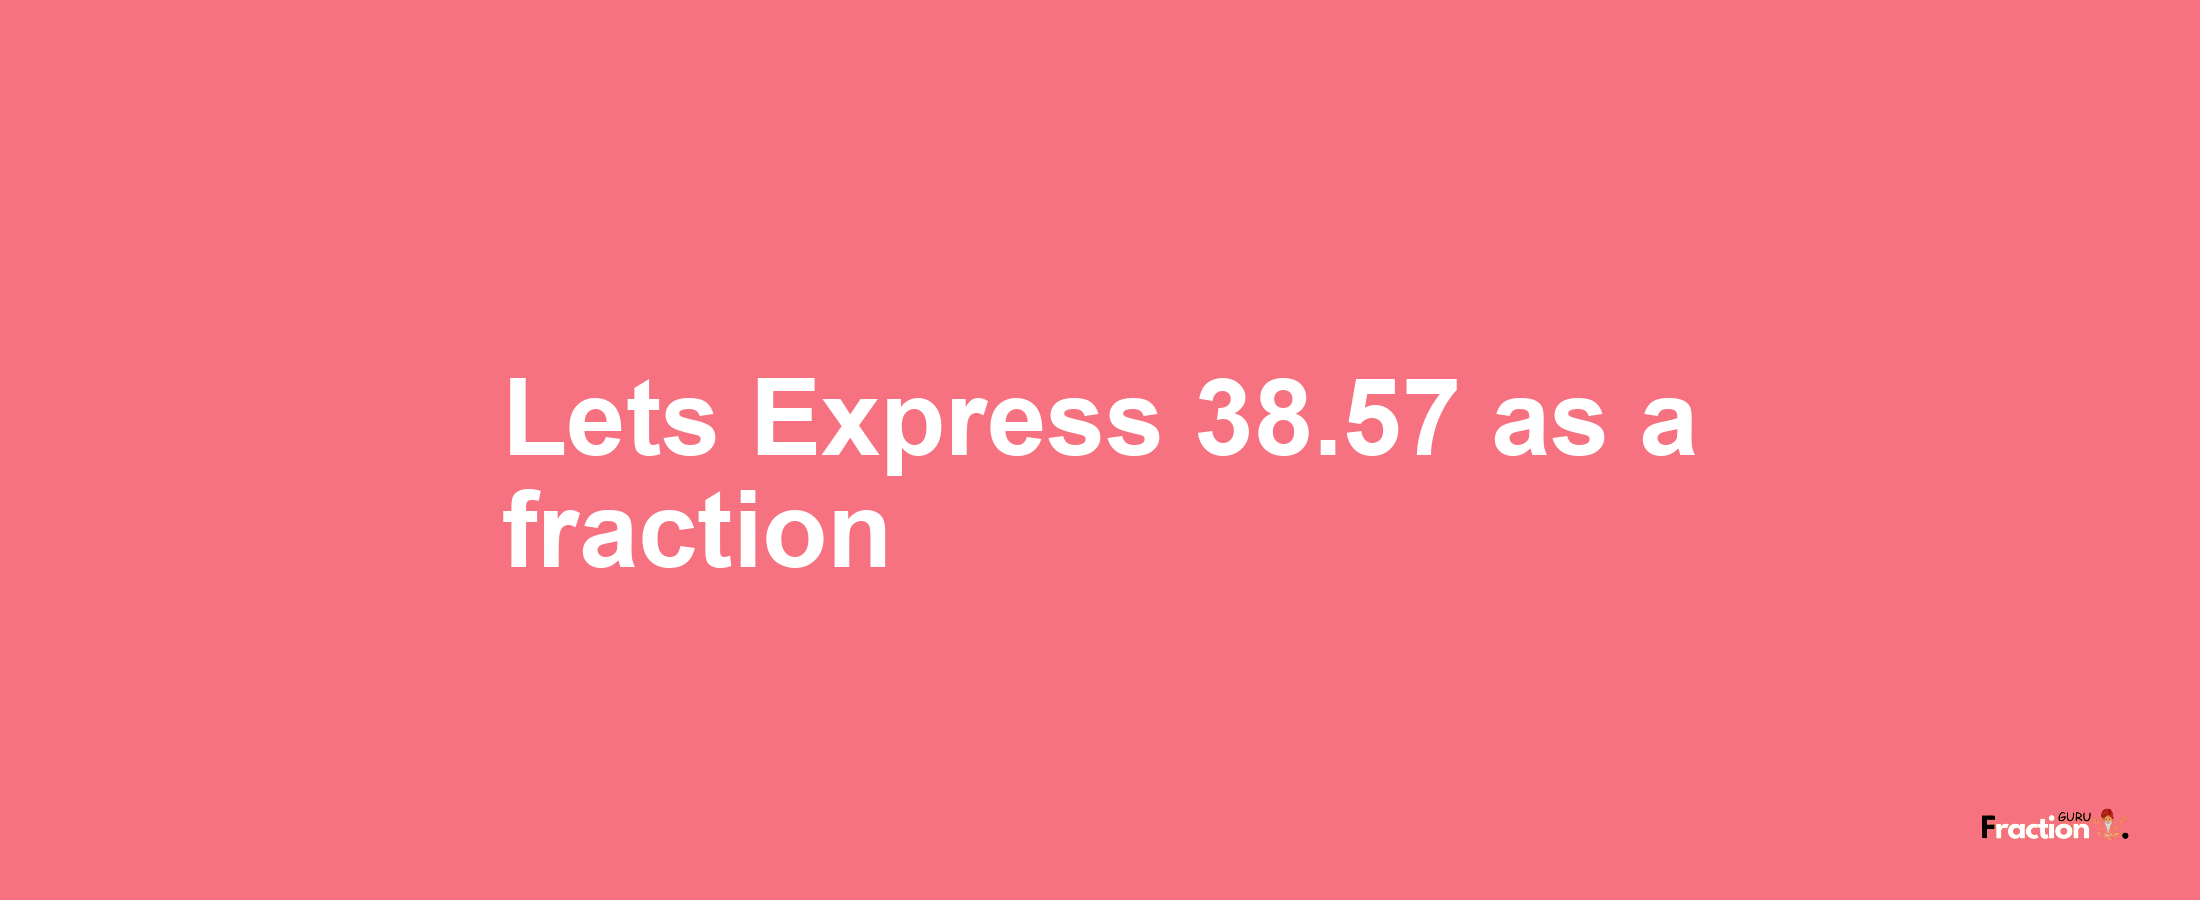 Lets Express 38.57 as afraction